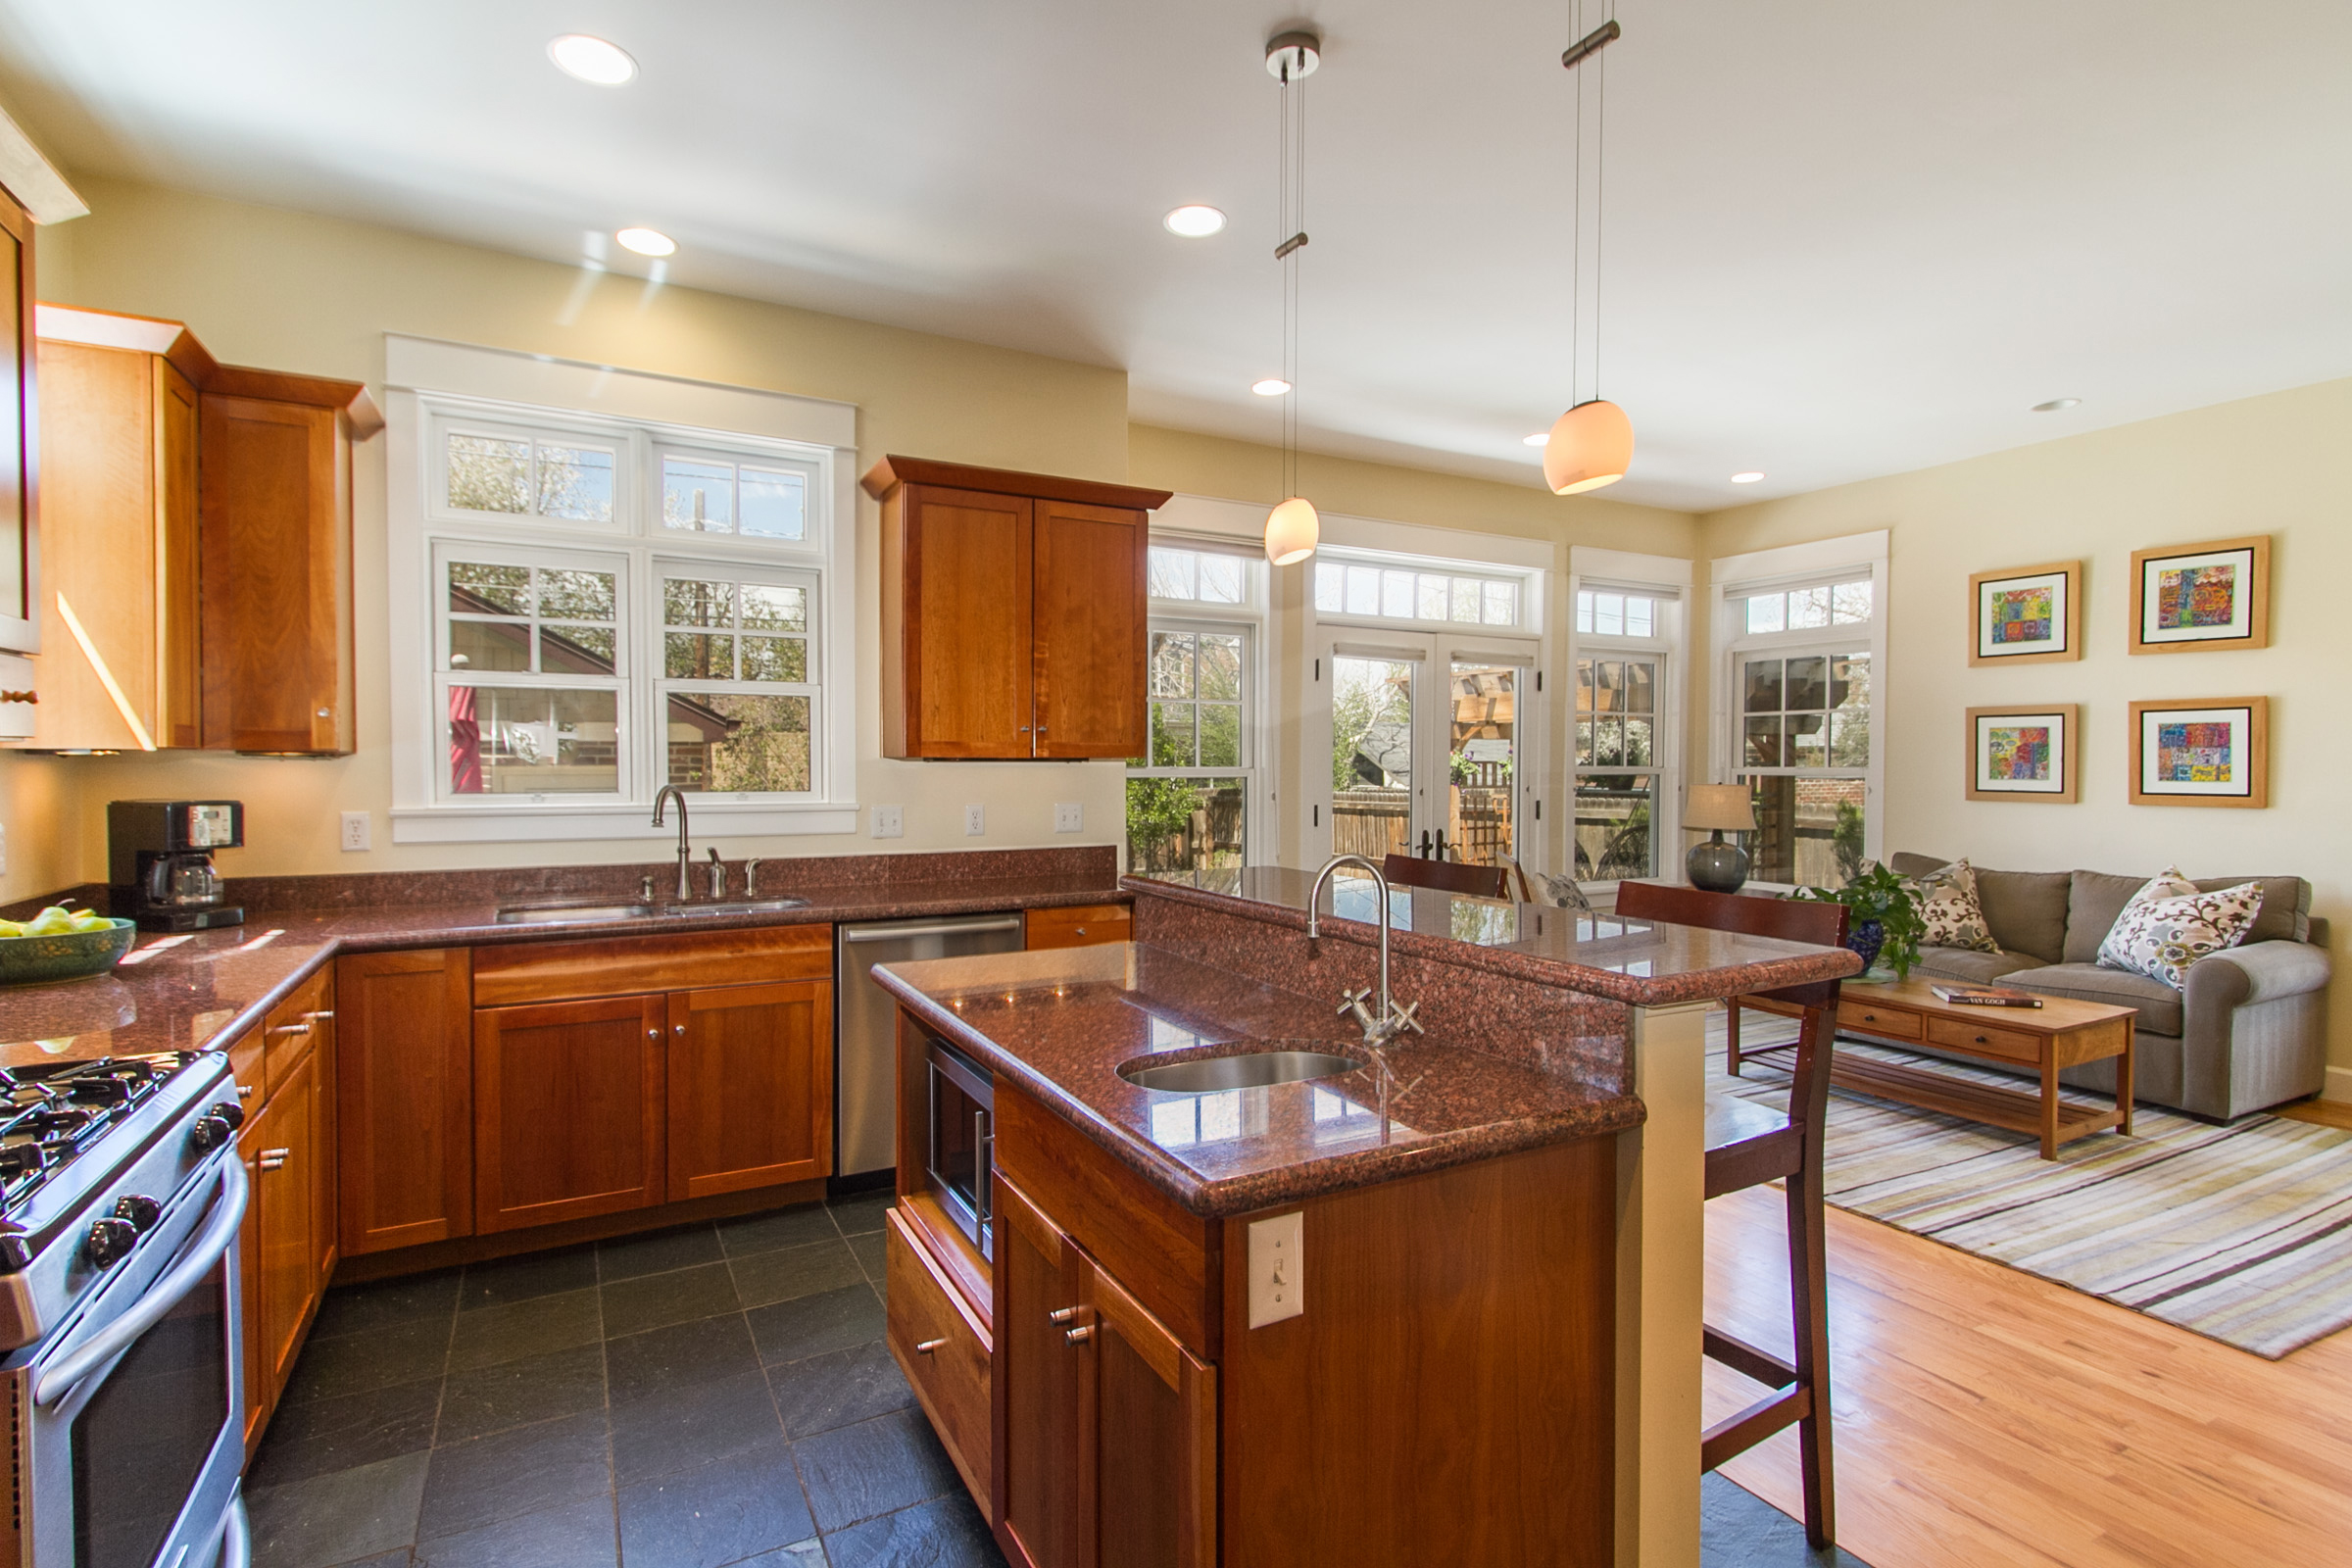 1246085_Kitchen-And-Family-Room_high.jpg